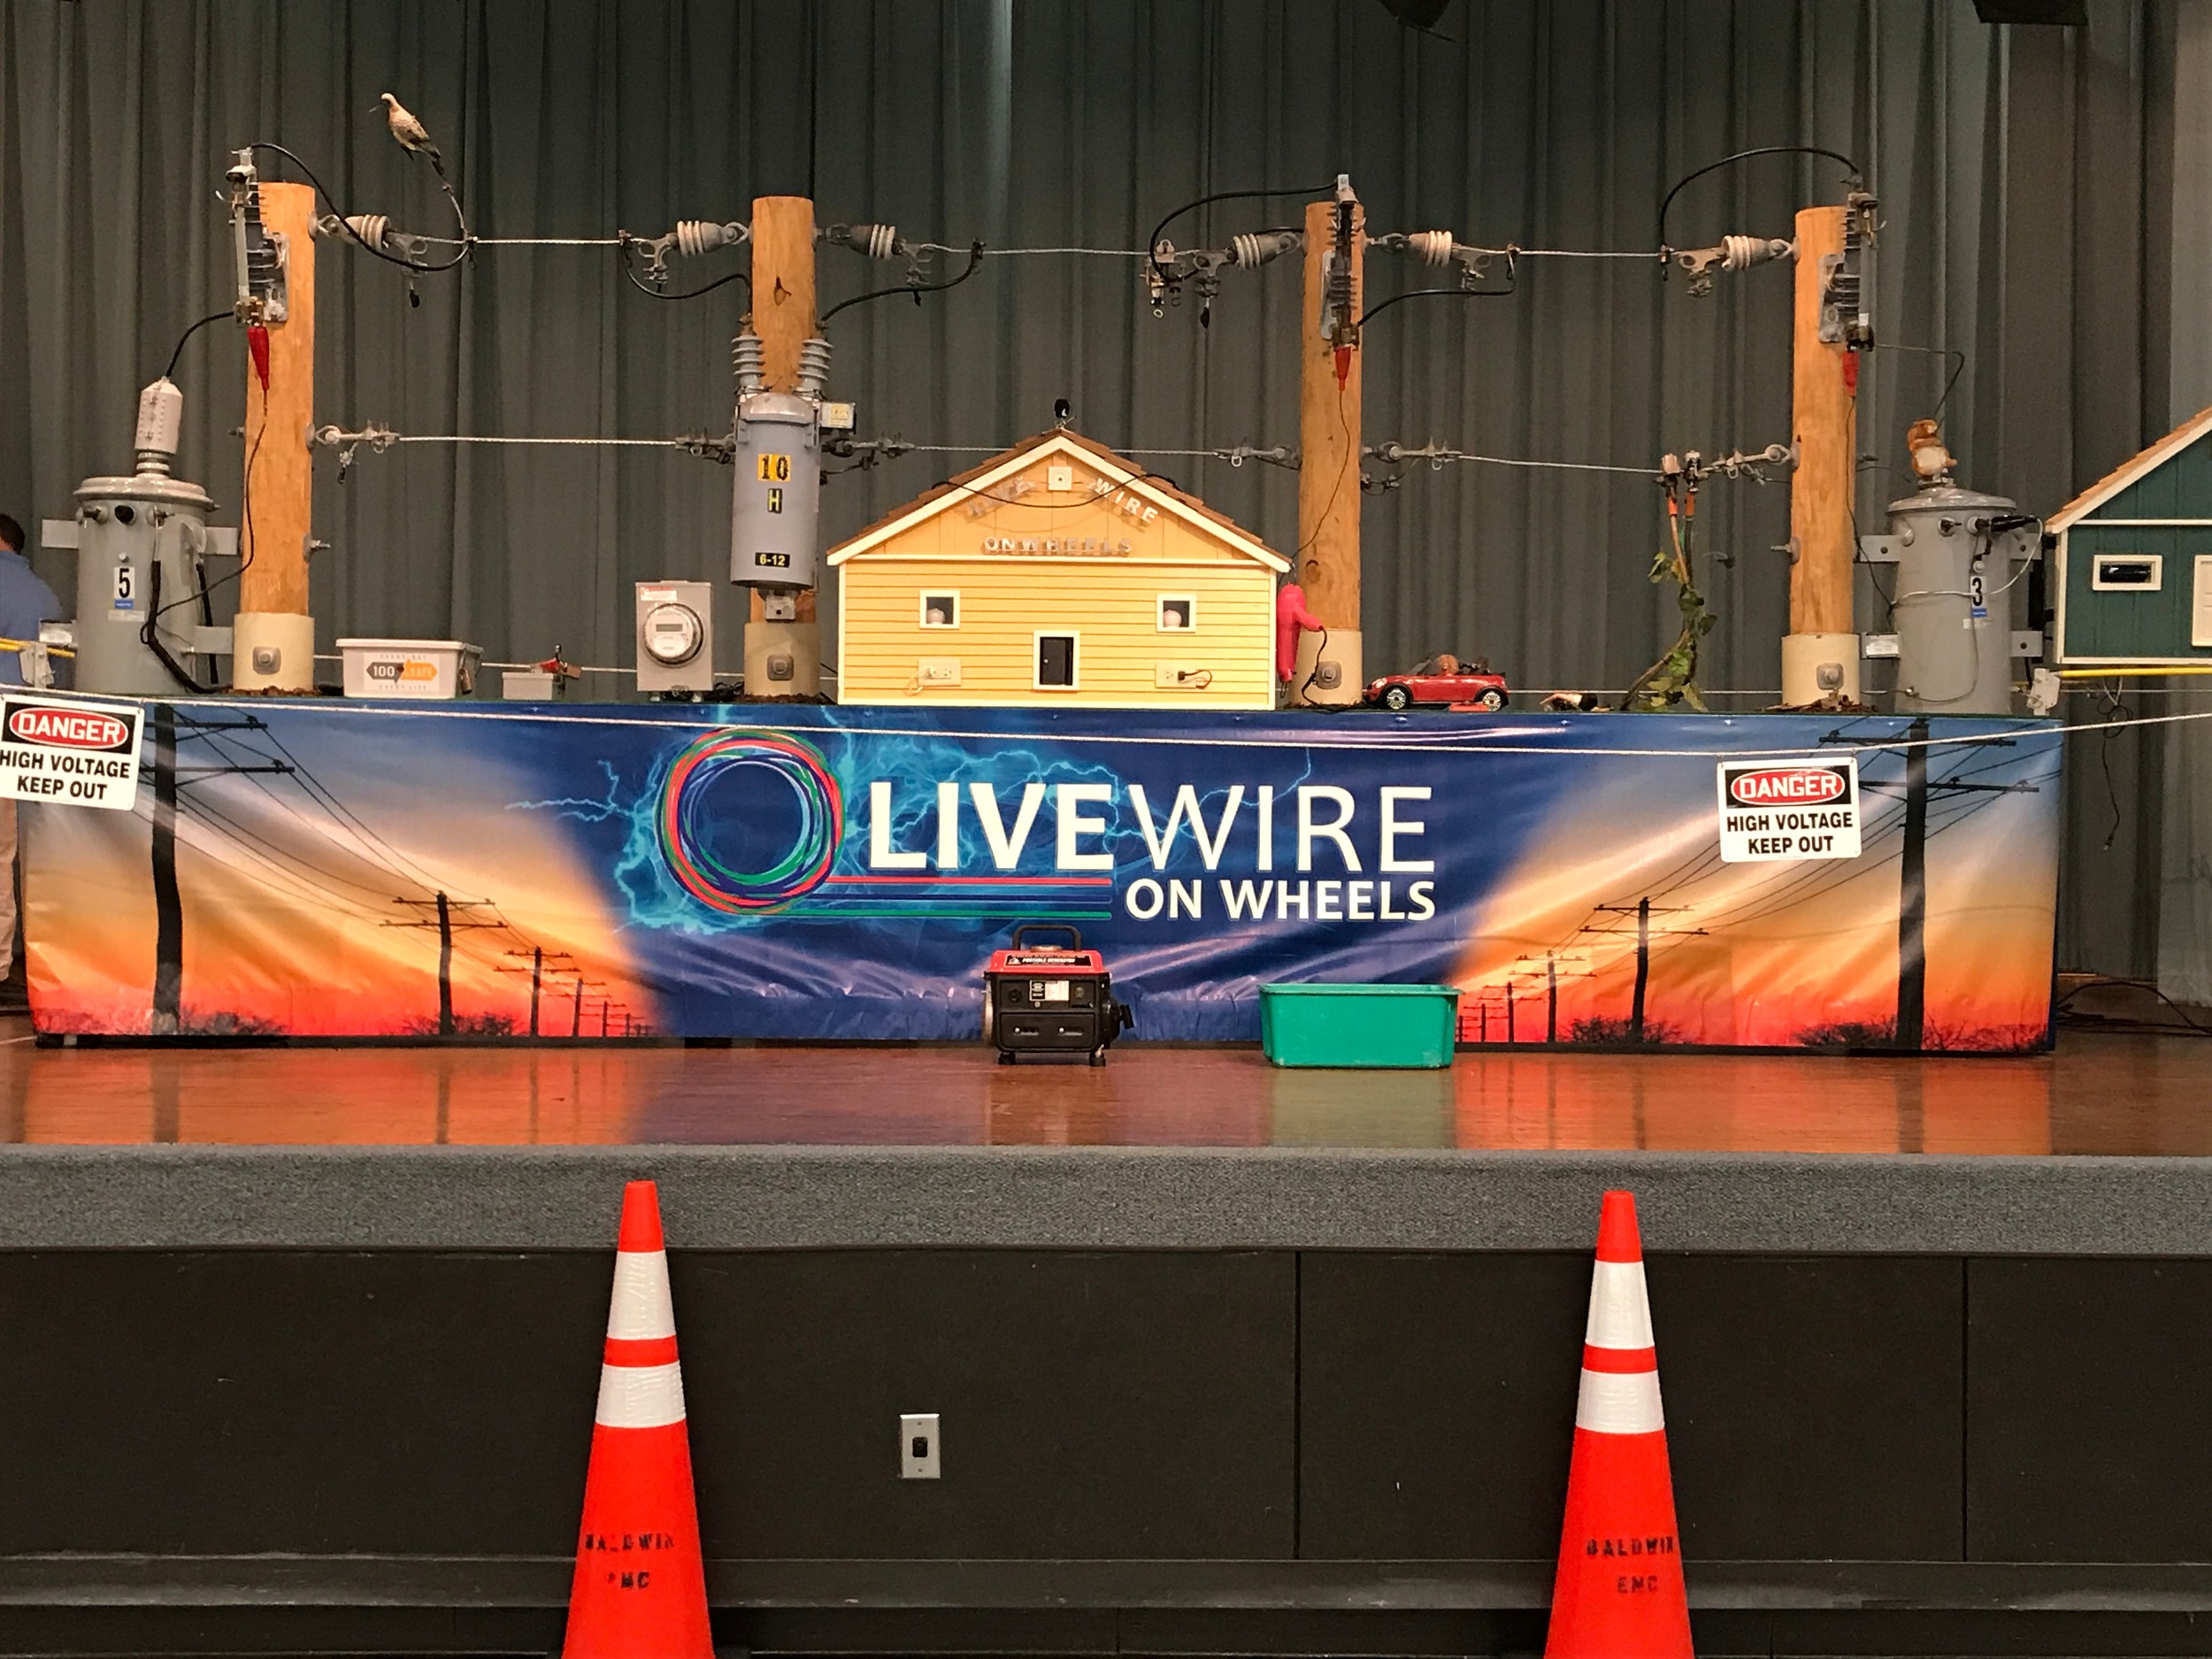 Building Safety Month kicked off in the Foley Civic Center with The All Hazards Preparedness Expo, which featured educational booths and a demonstration put on by LiveWire on Wheels.